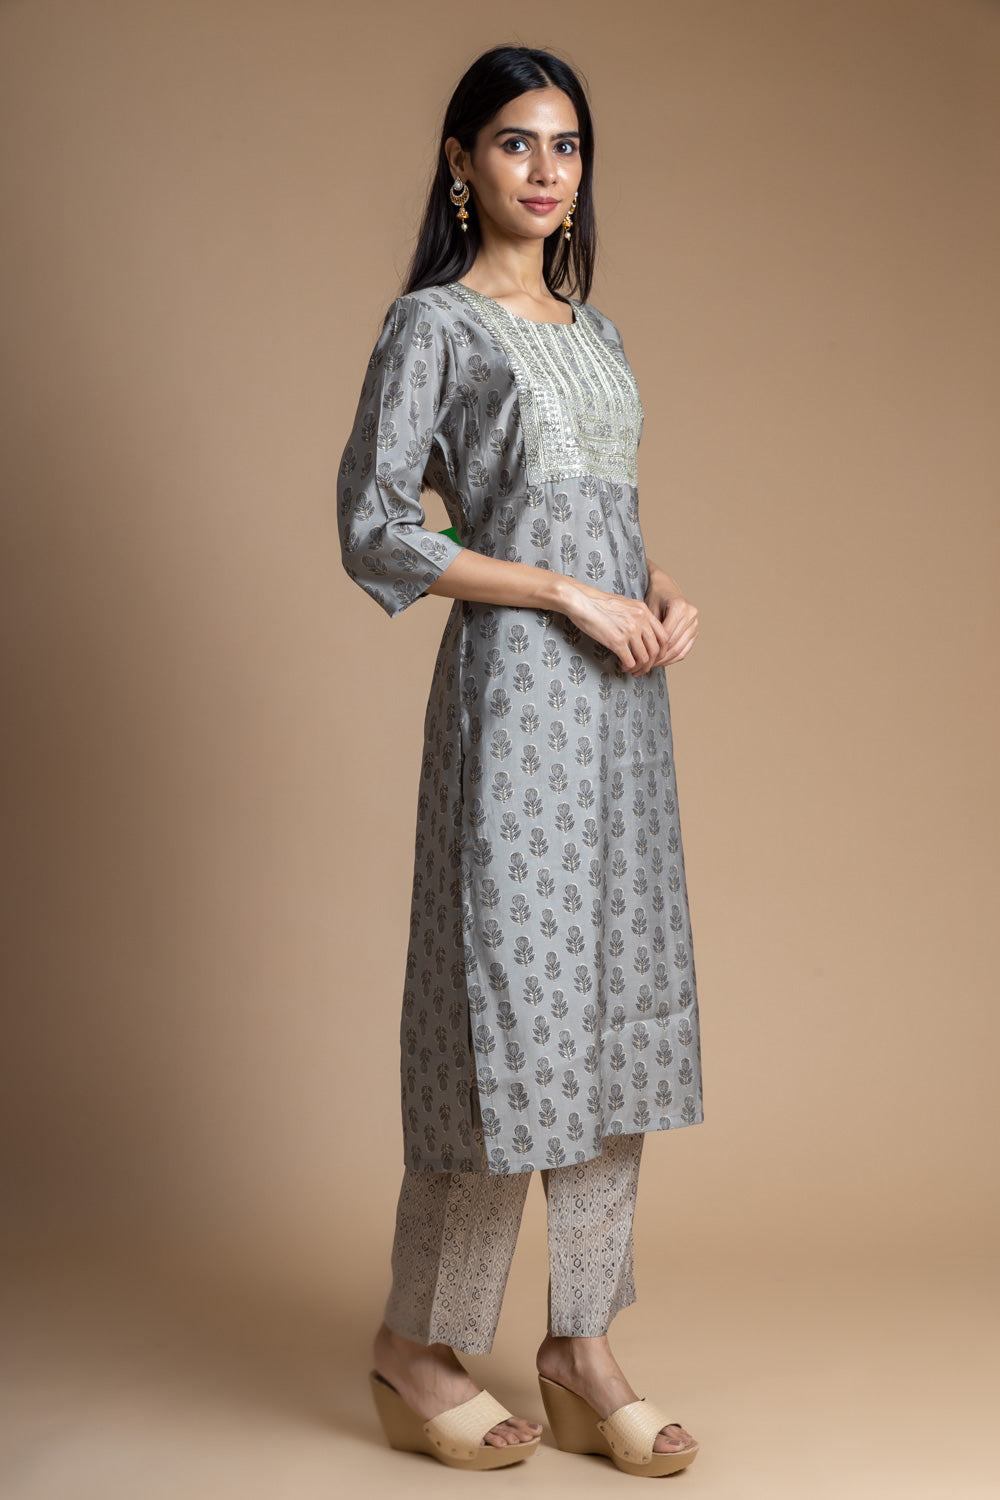 Cotton Kurti And Pant With Gotta Patti, Mirror Work & Sequence Work